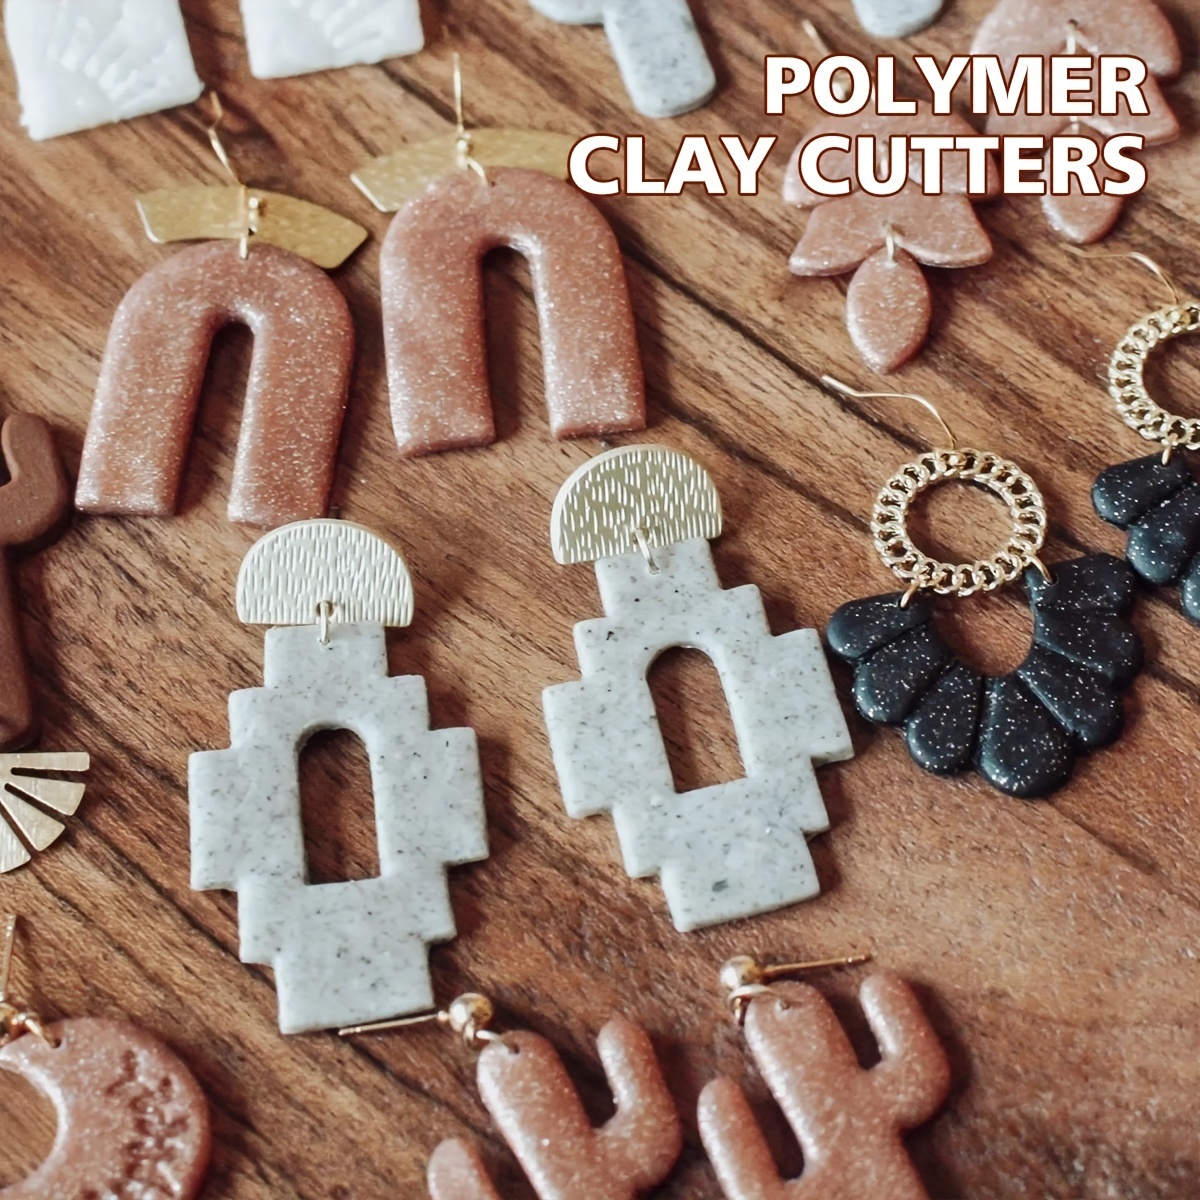 KEOKER Halloween Polymer Clay Cutters, Clay Cutters for Halloween